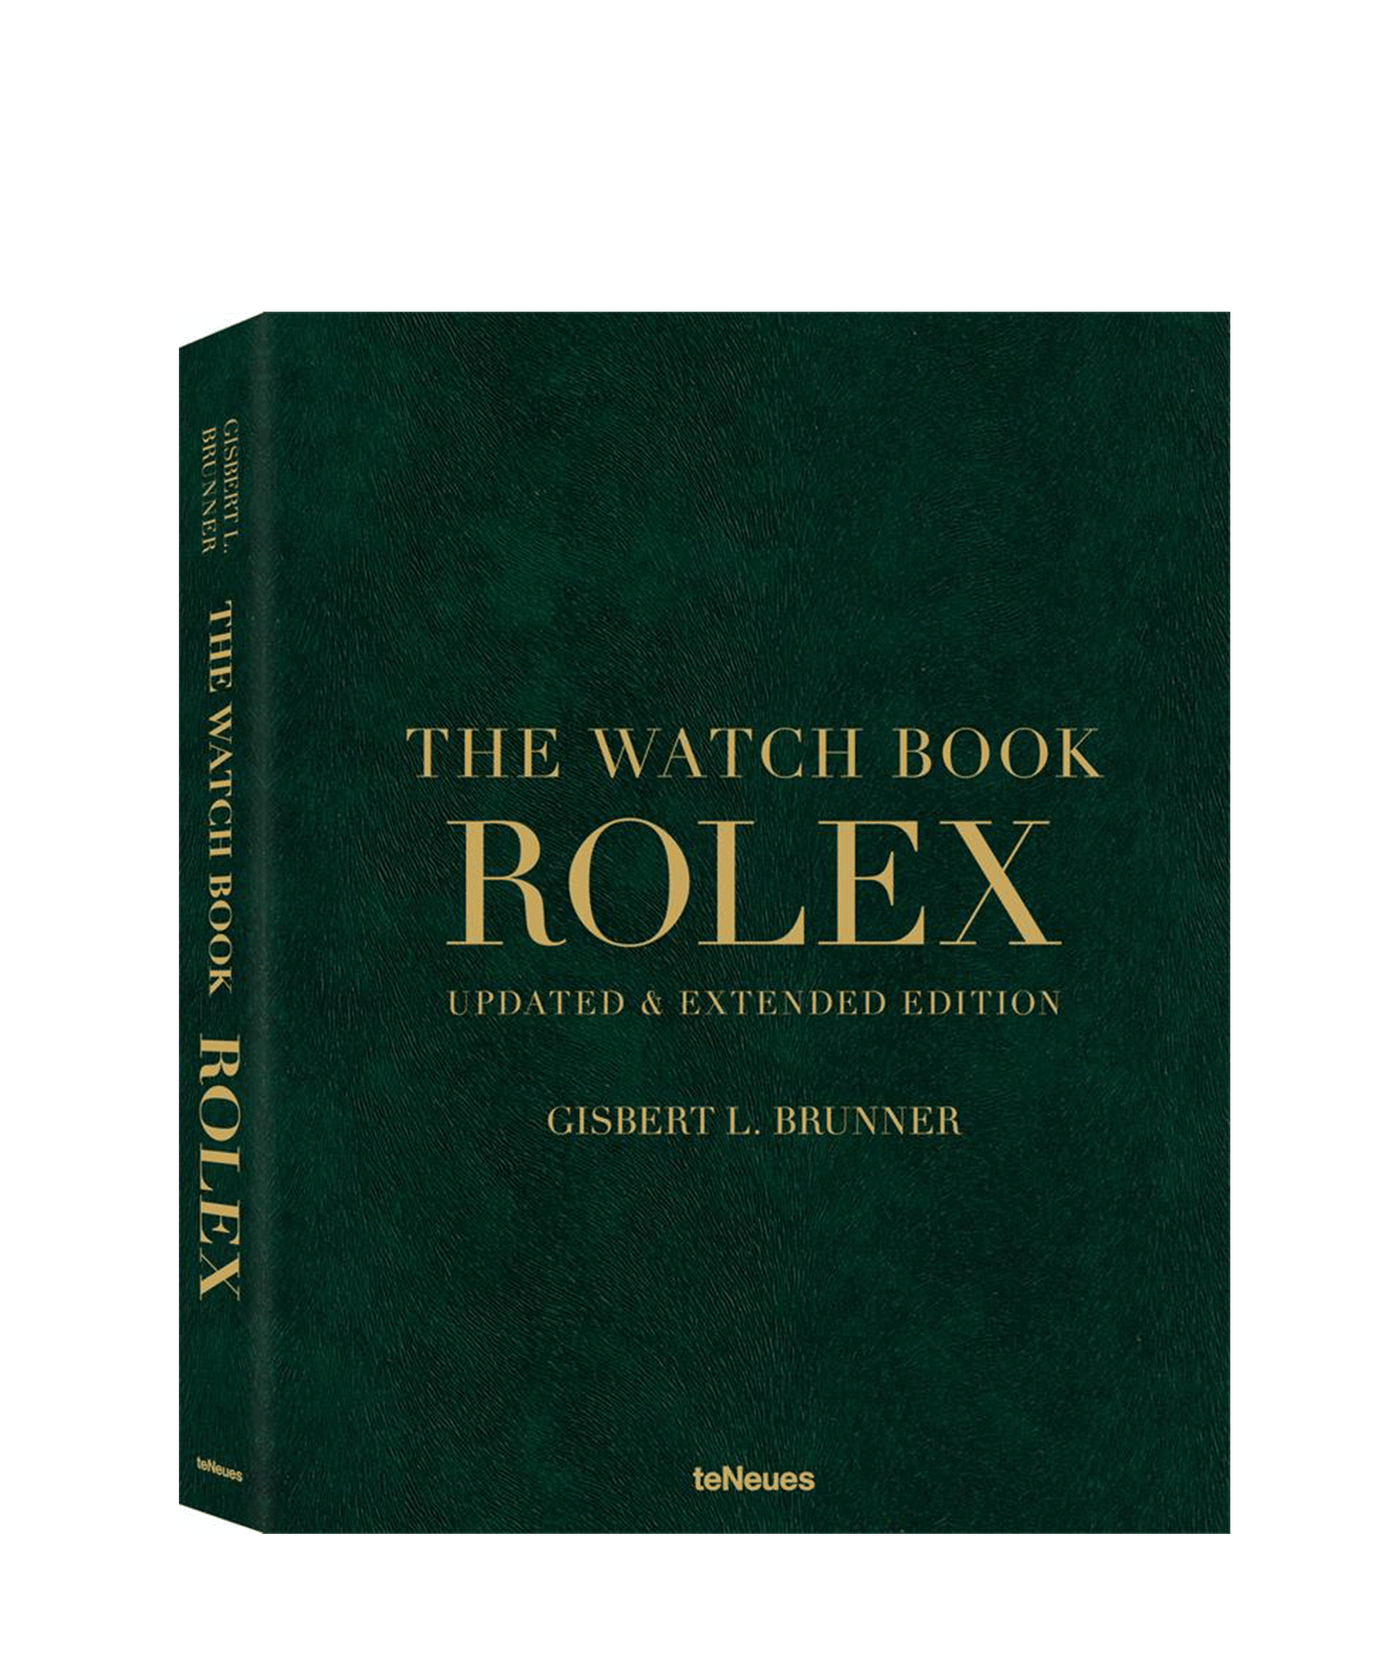 teNeues - The Watch Book Rolex - Updated & Extended Edition